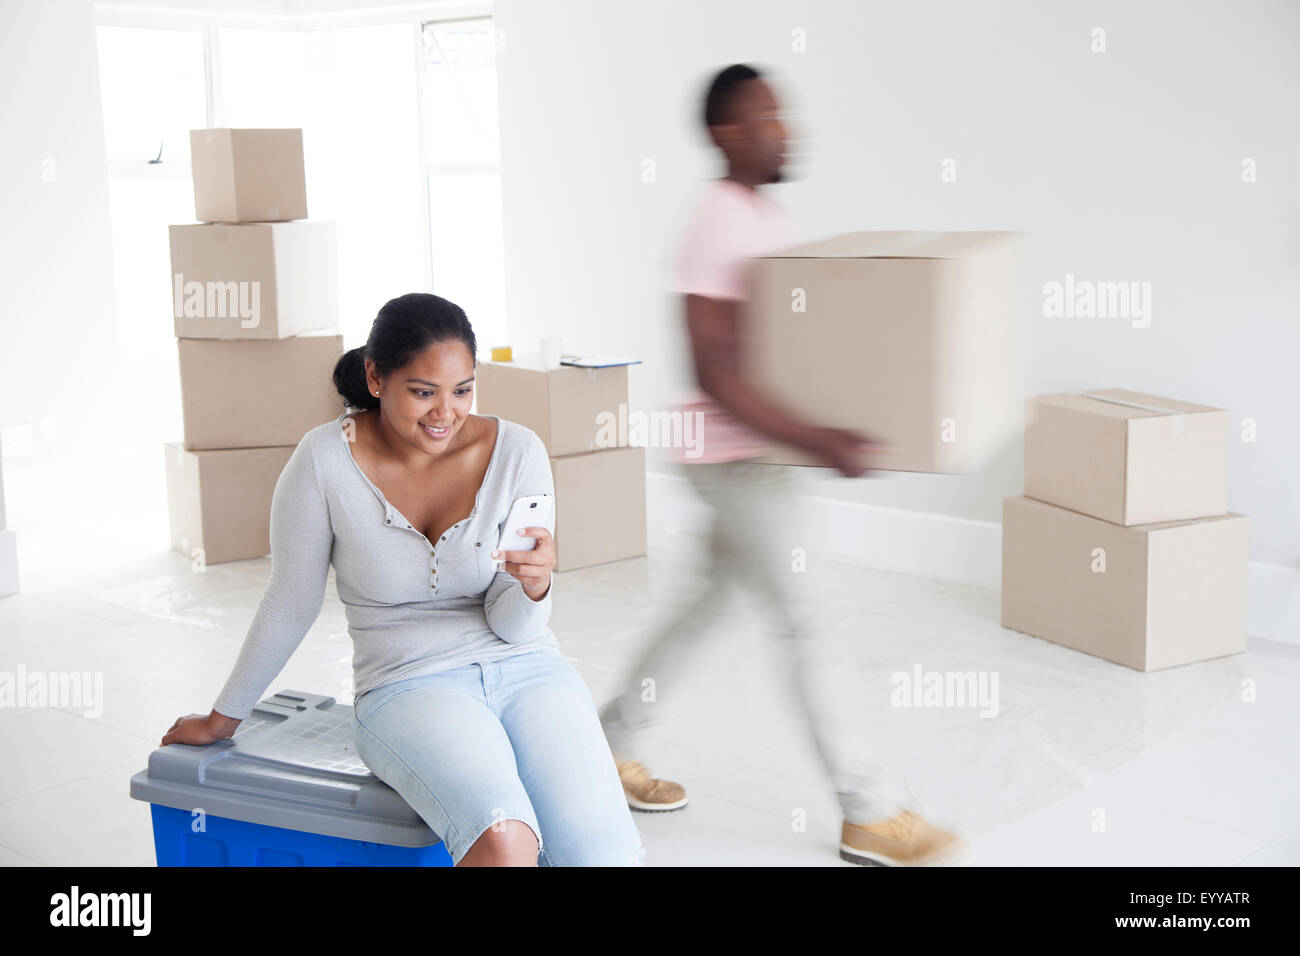 Woman relaxing with man carrying boxes in new home Banque D'Images